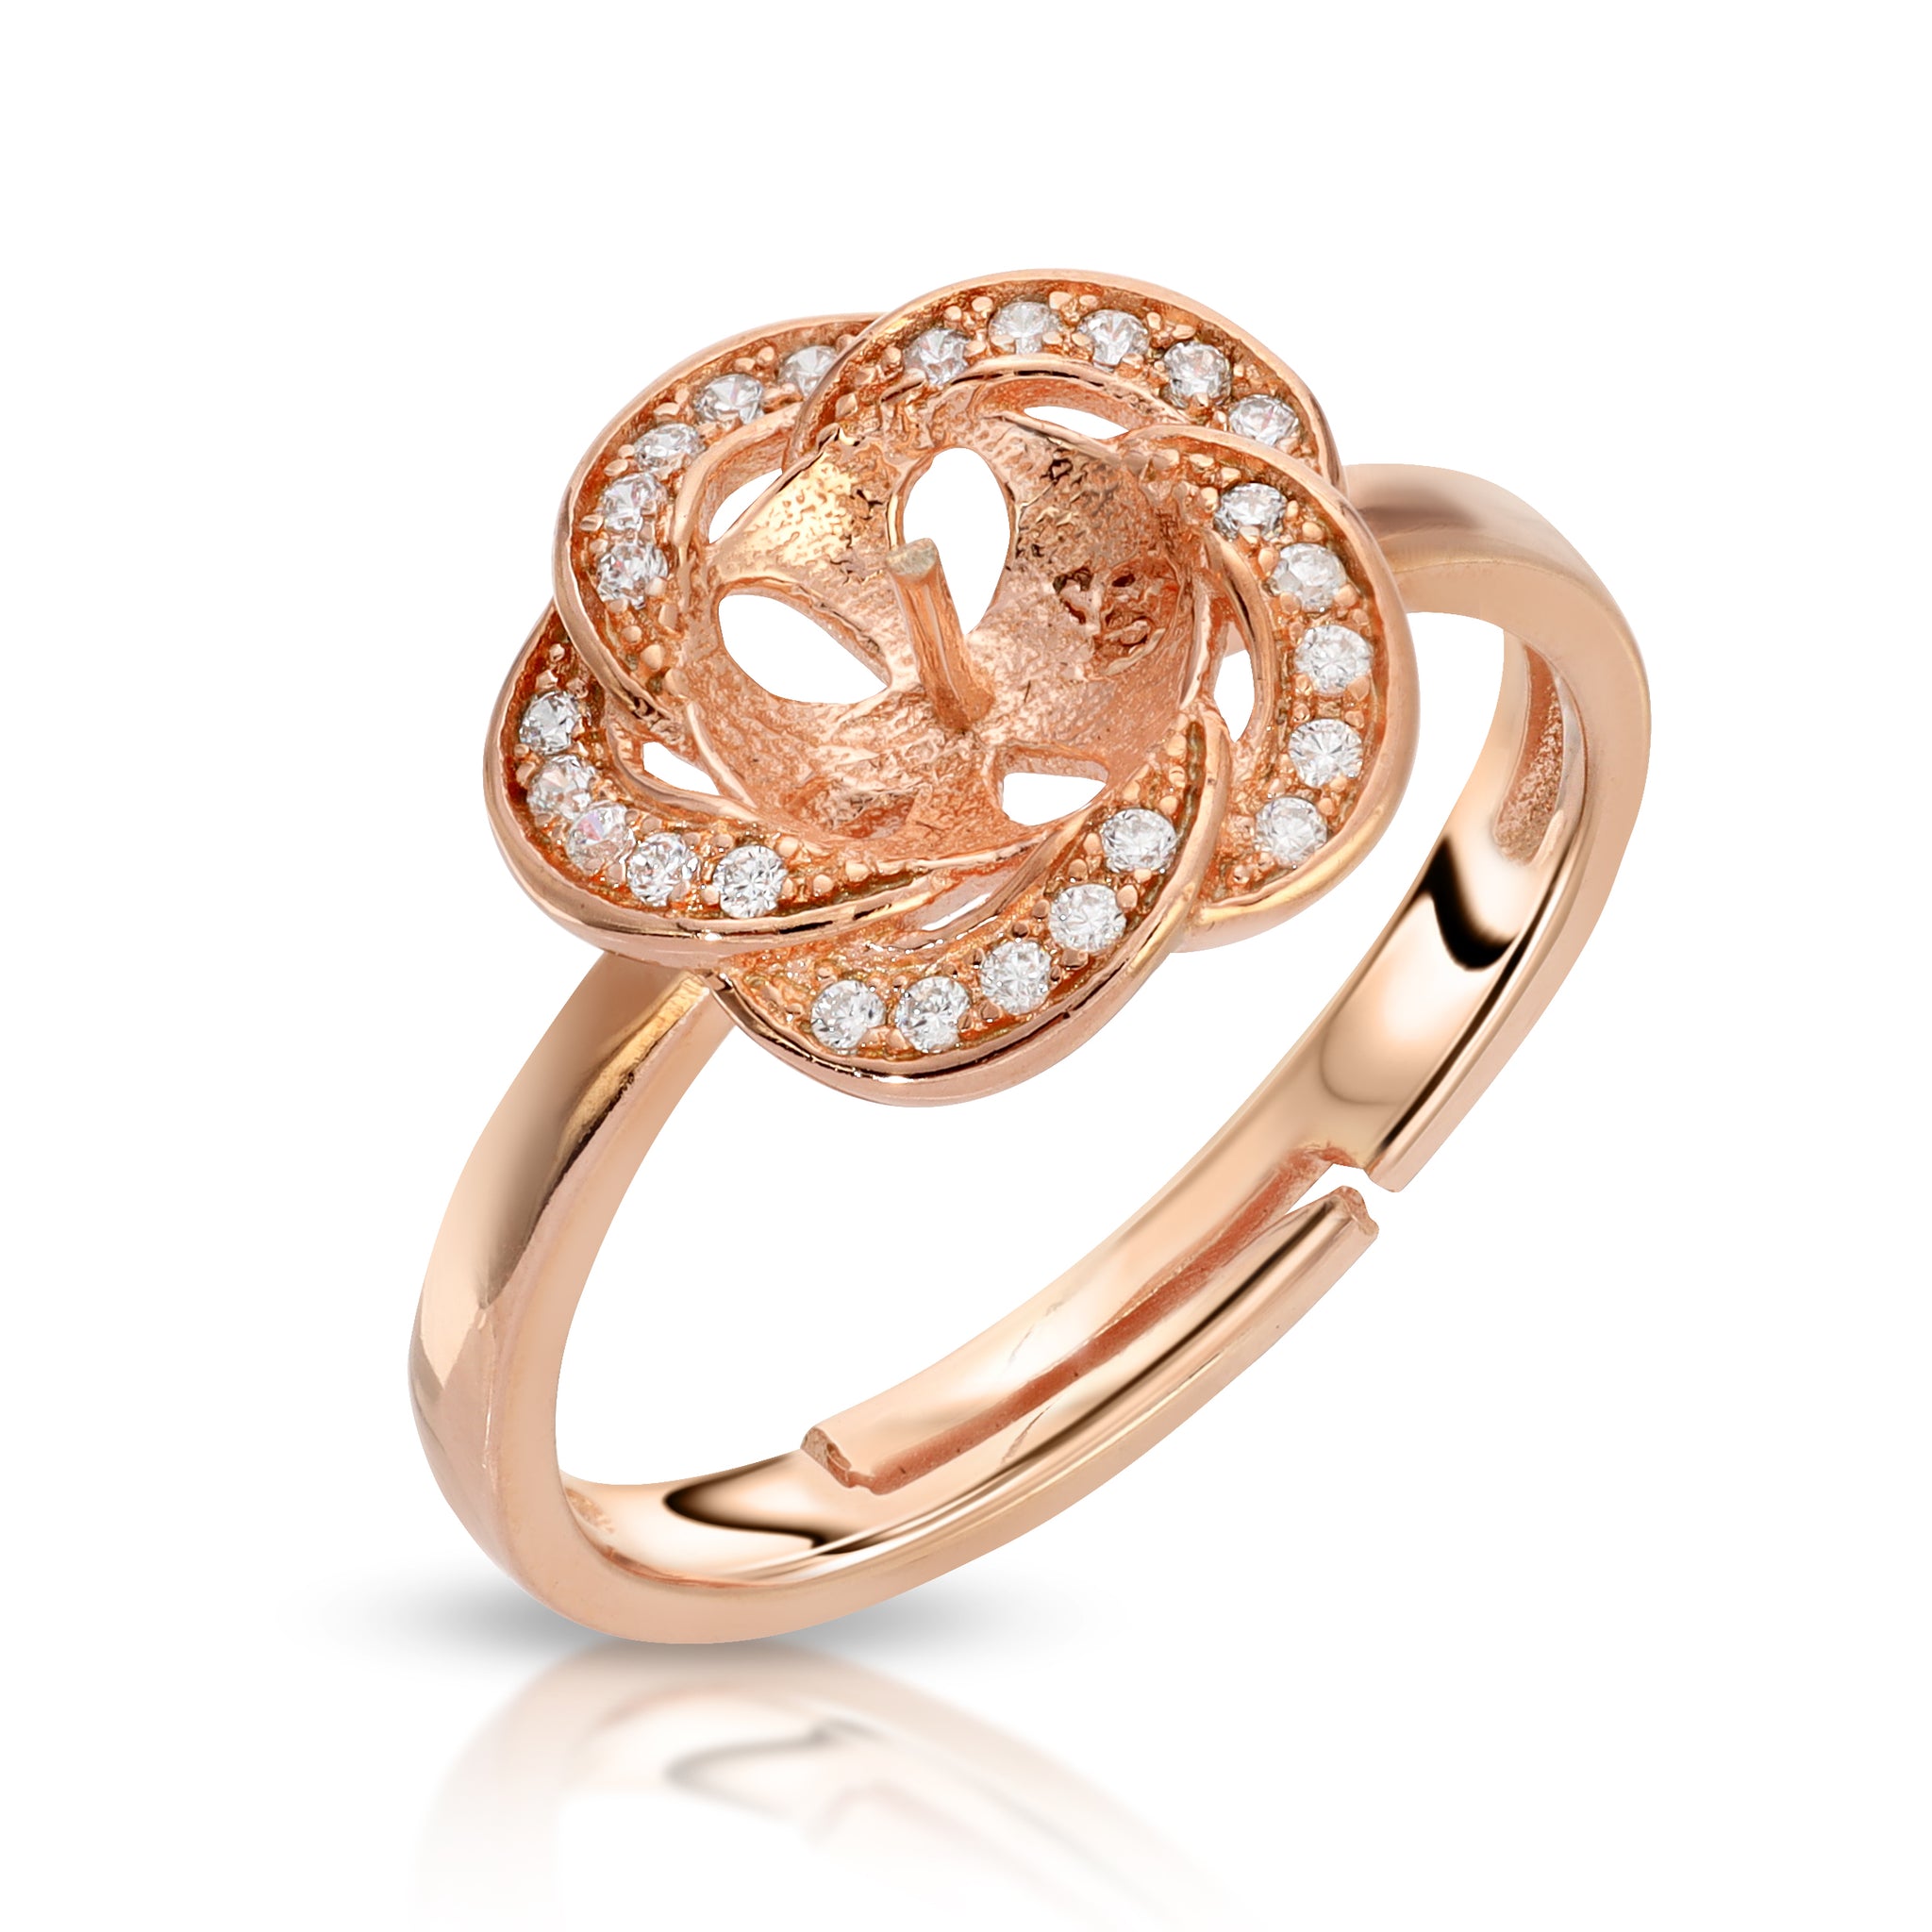 1 Gram Gold Plated Flower With Diamond Glamorous Design Ring For Women -  Style Lrg-018 – Soni Fashion®